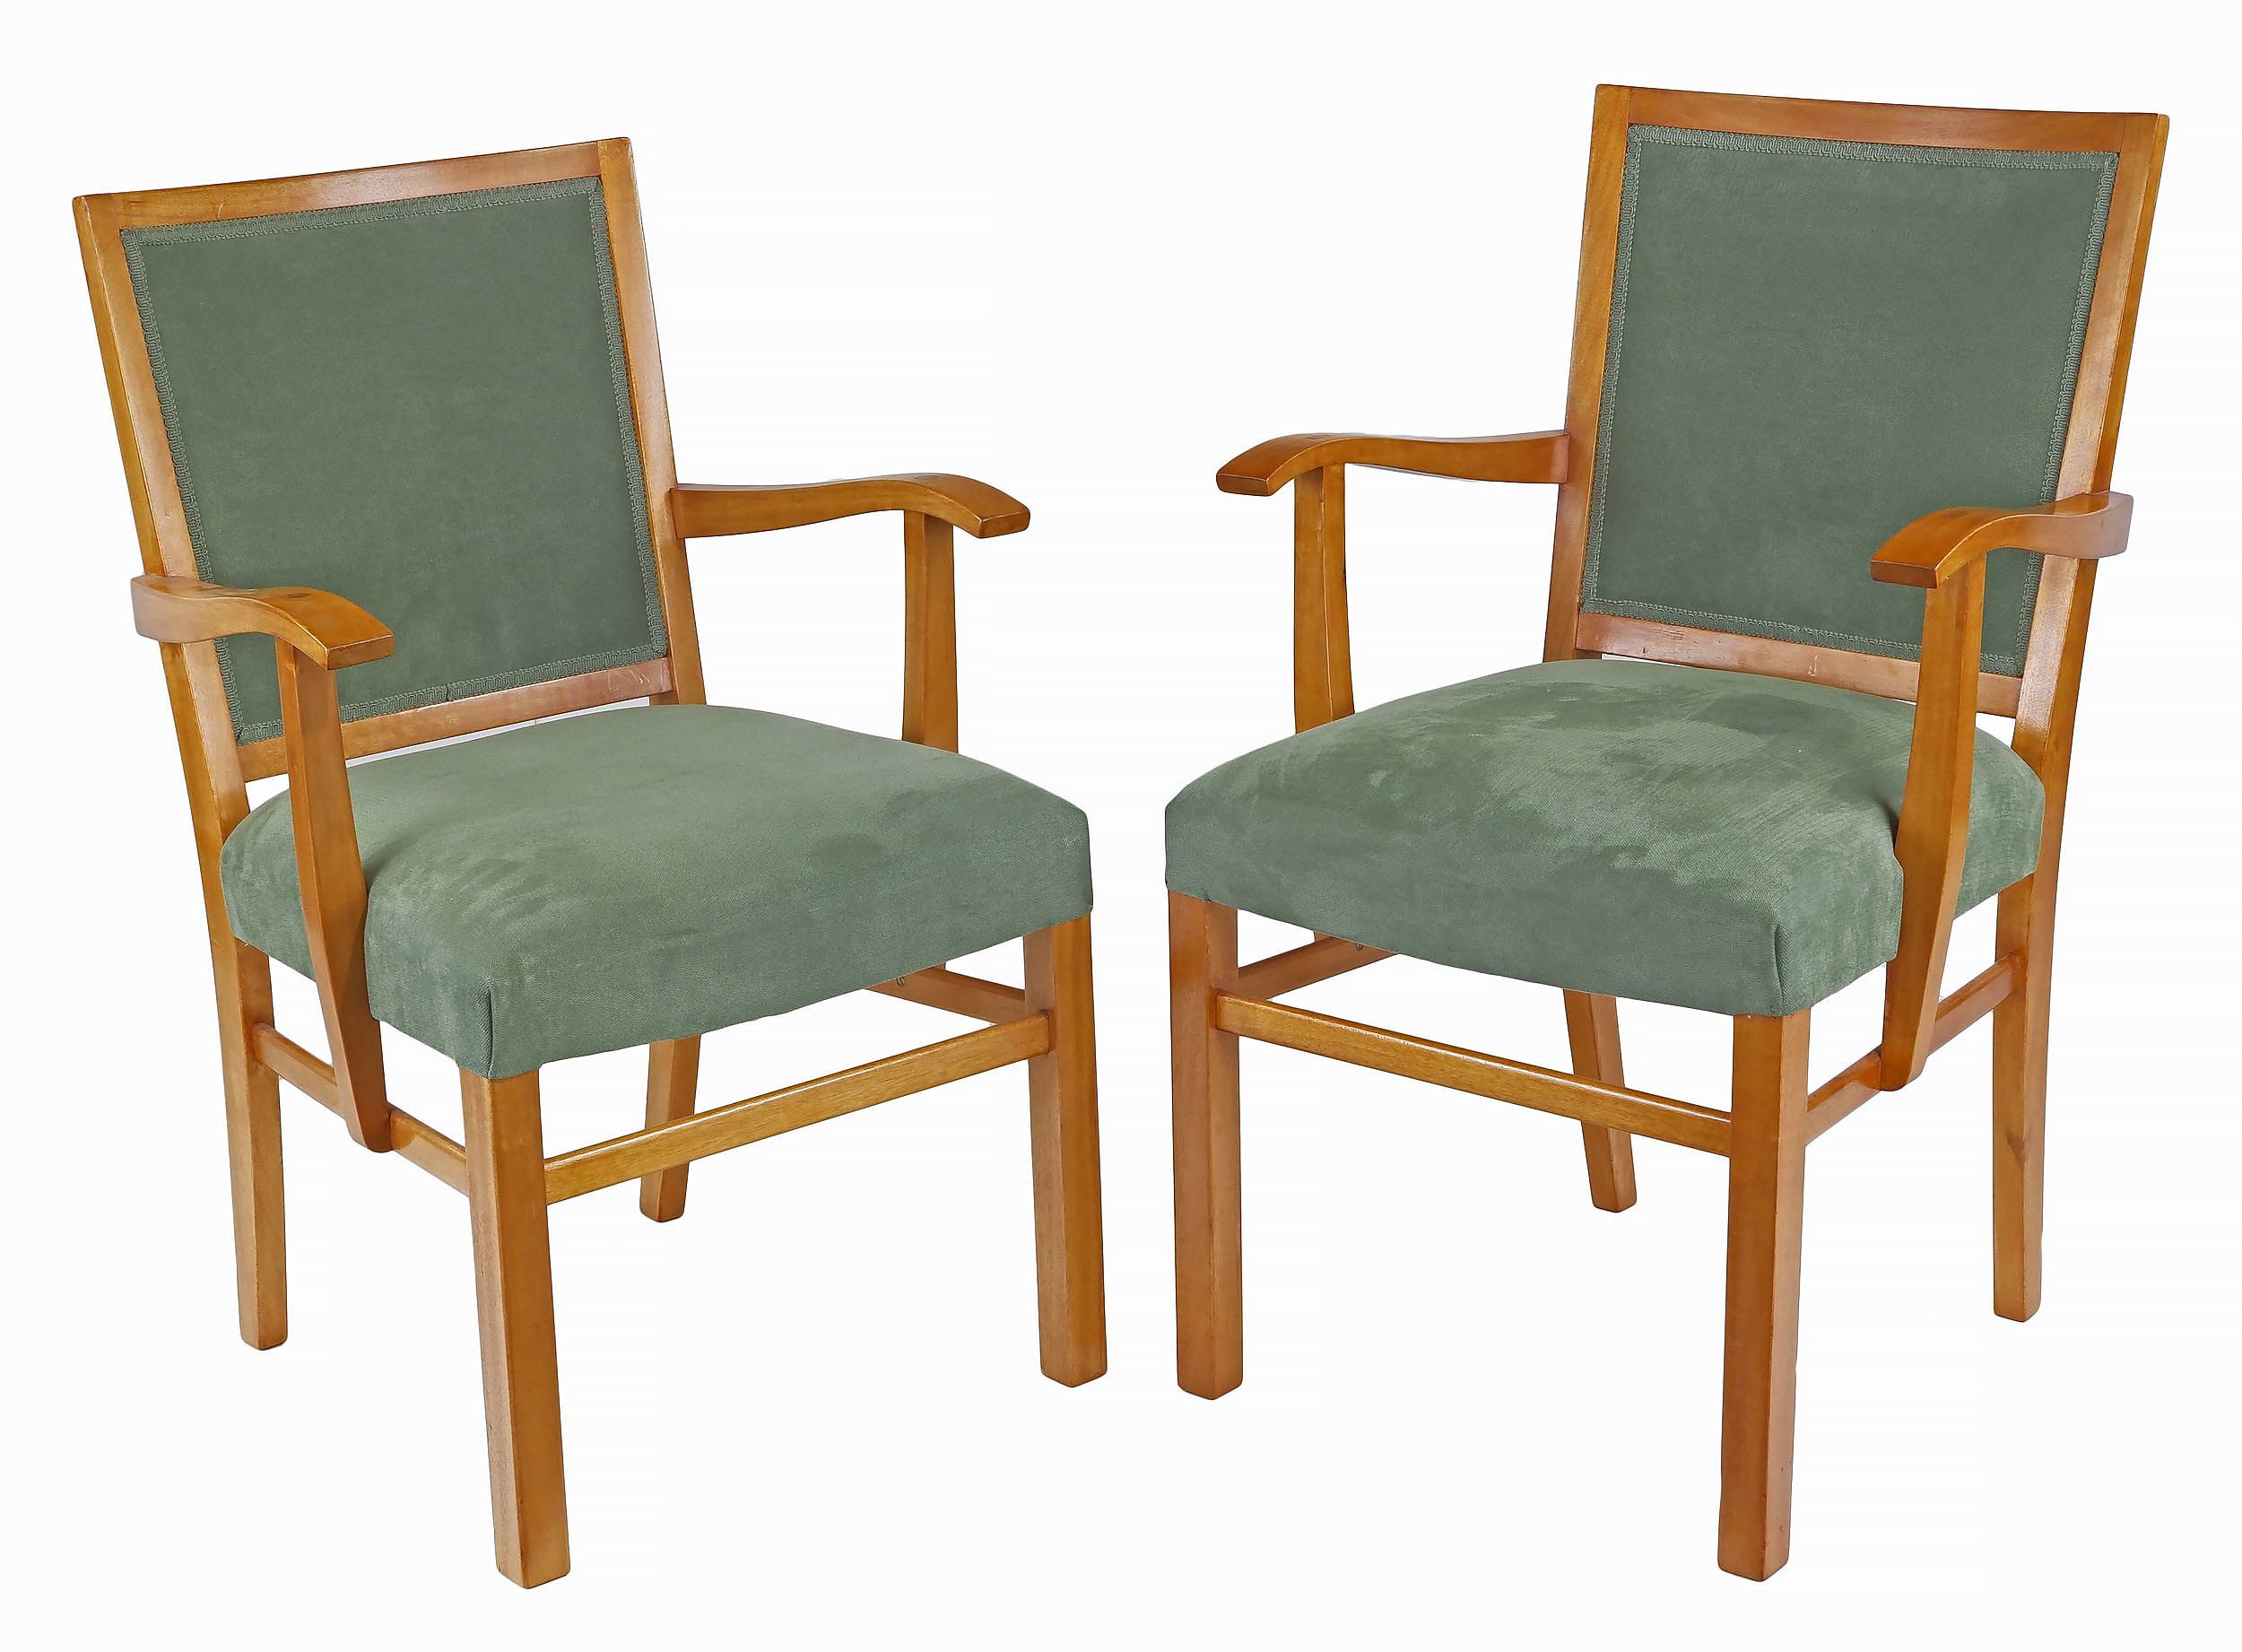 'Two Fred Ward Maple Armchairs'